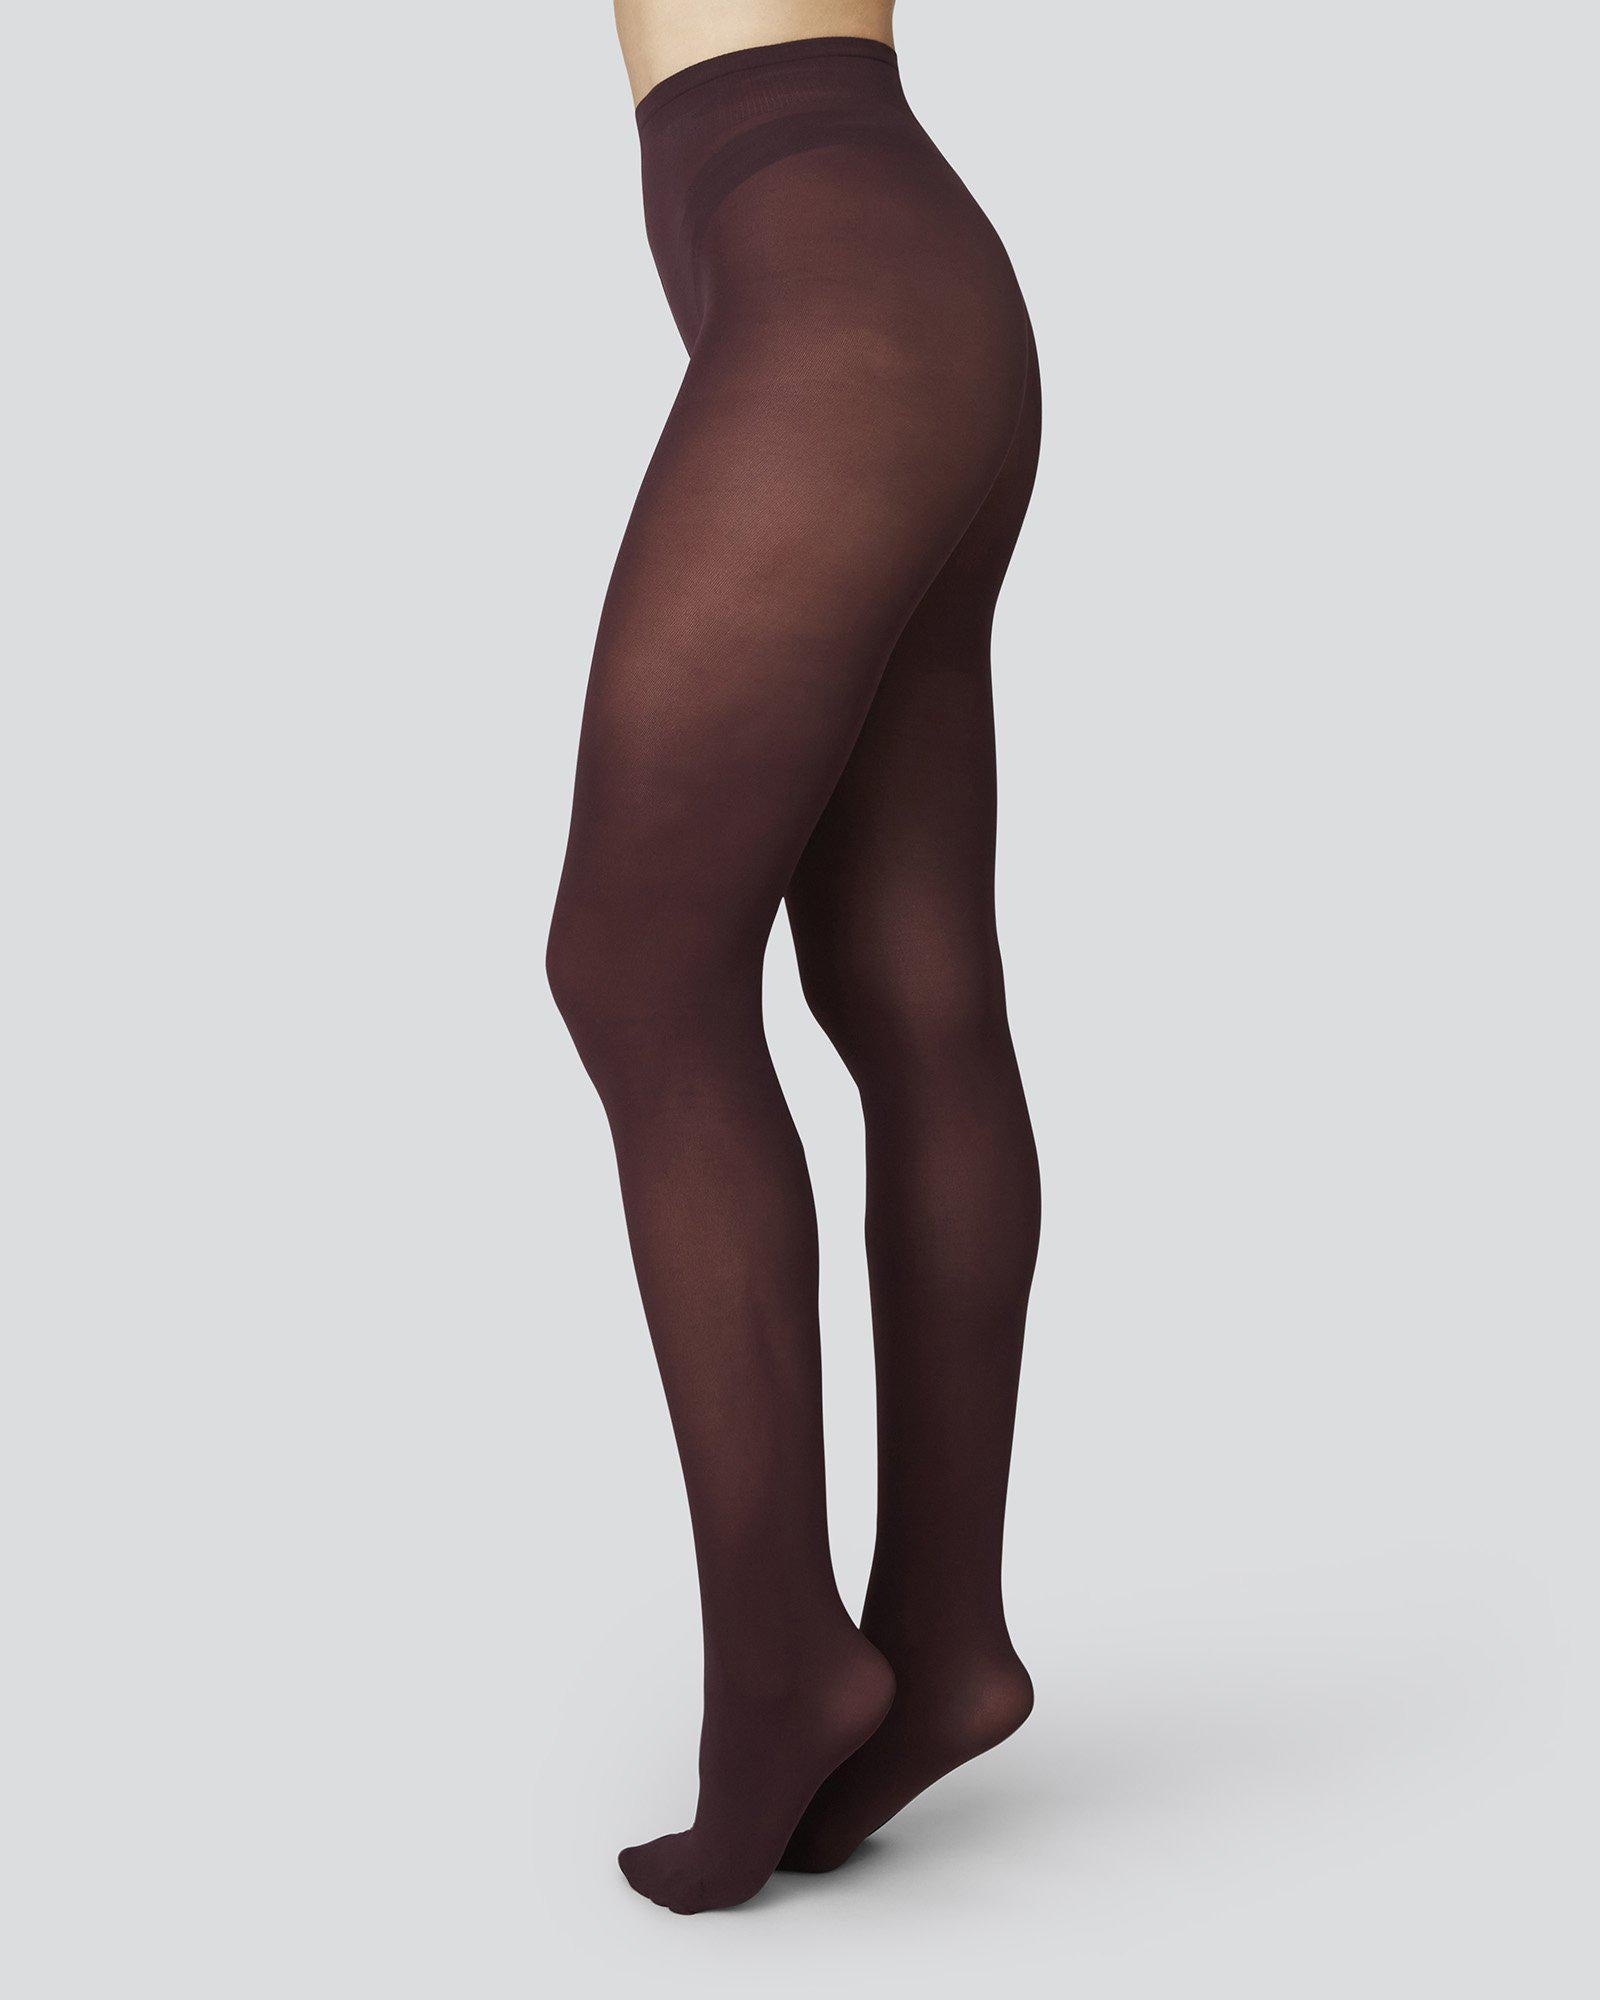 Buy Tights Beauty online